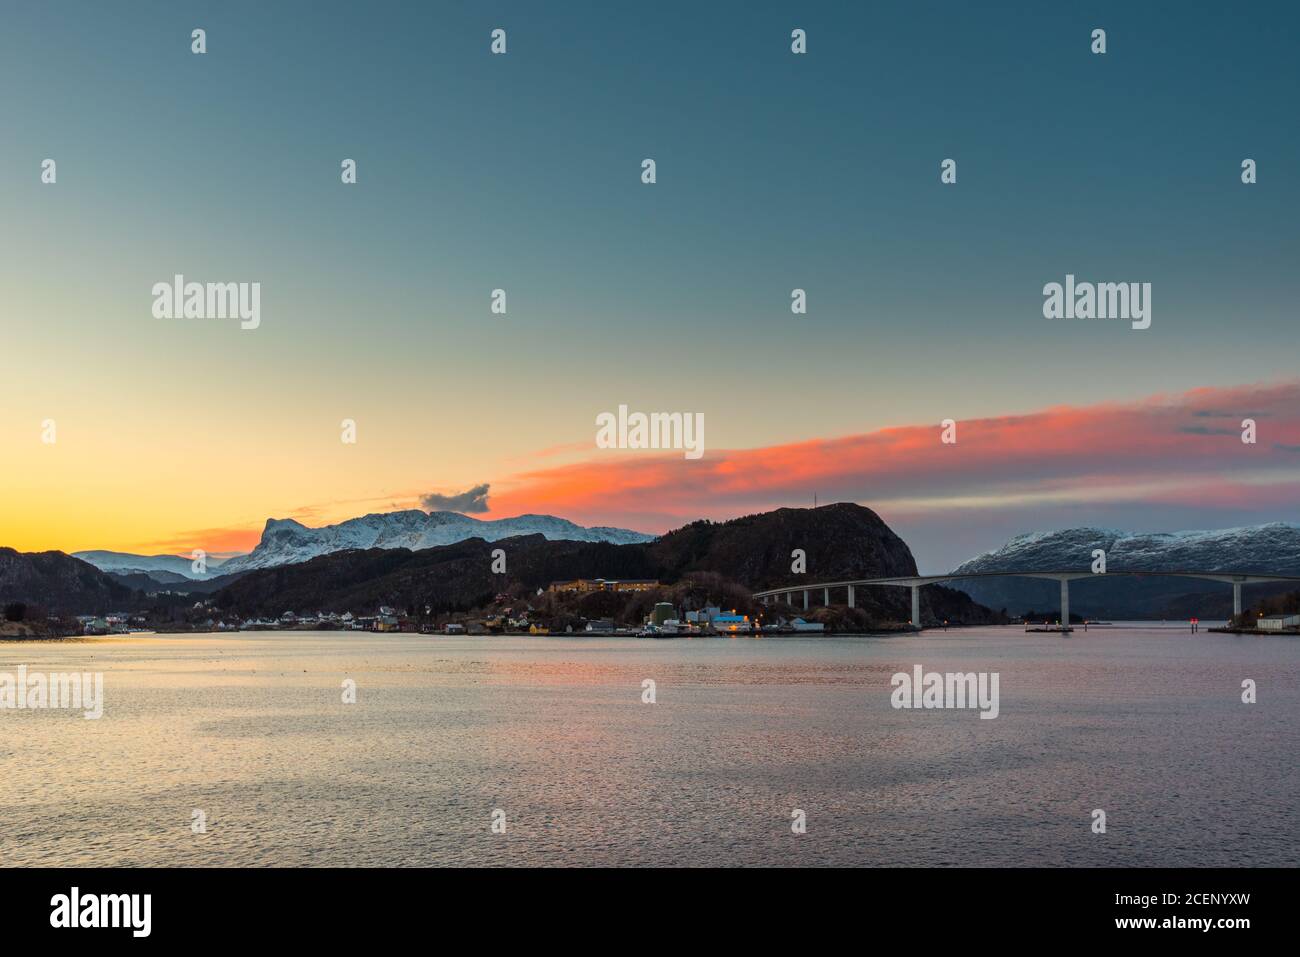 Colorful dawn over the coastline of Norway near the town Maloy with bridge, hills and snow capped mountains seen from cruise ship Stock Photo